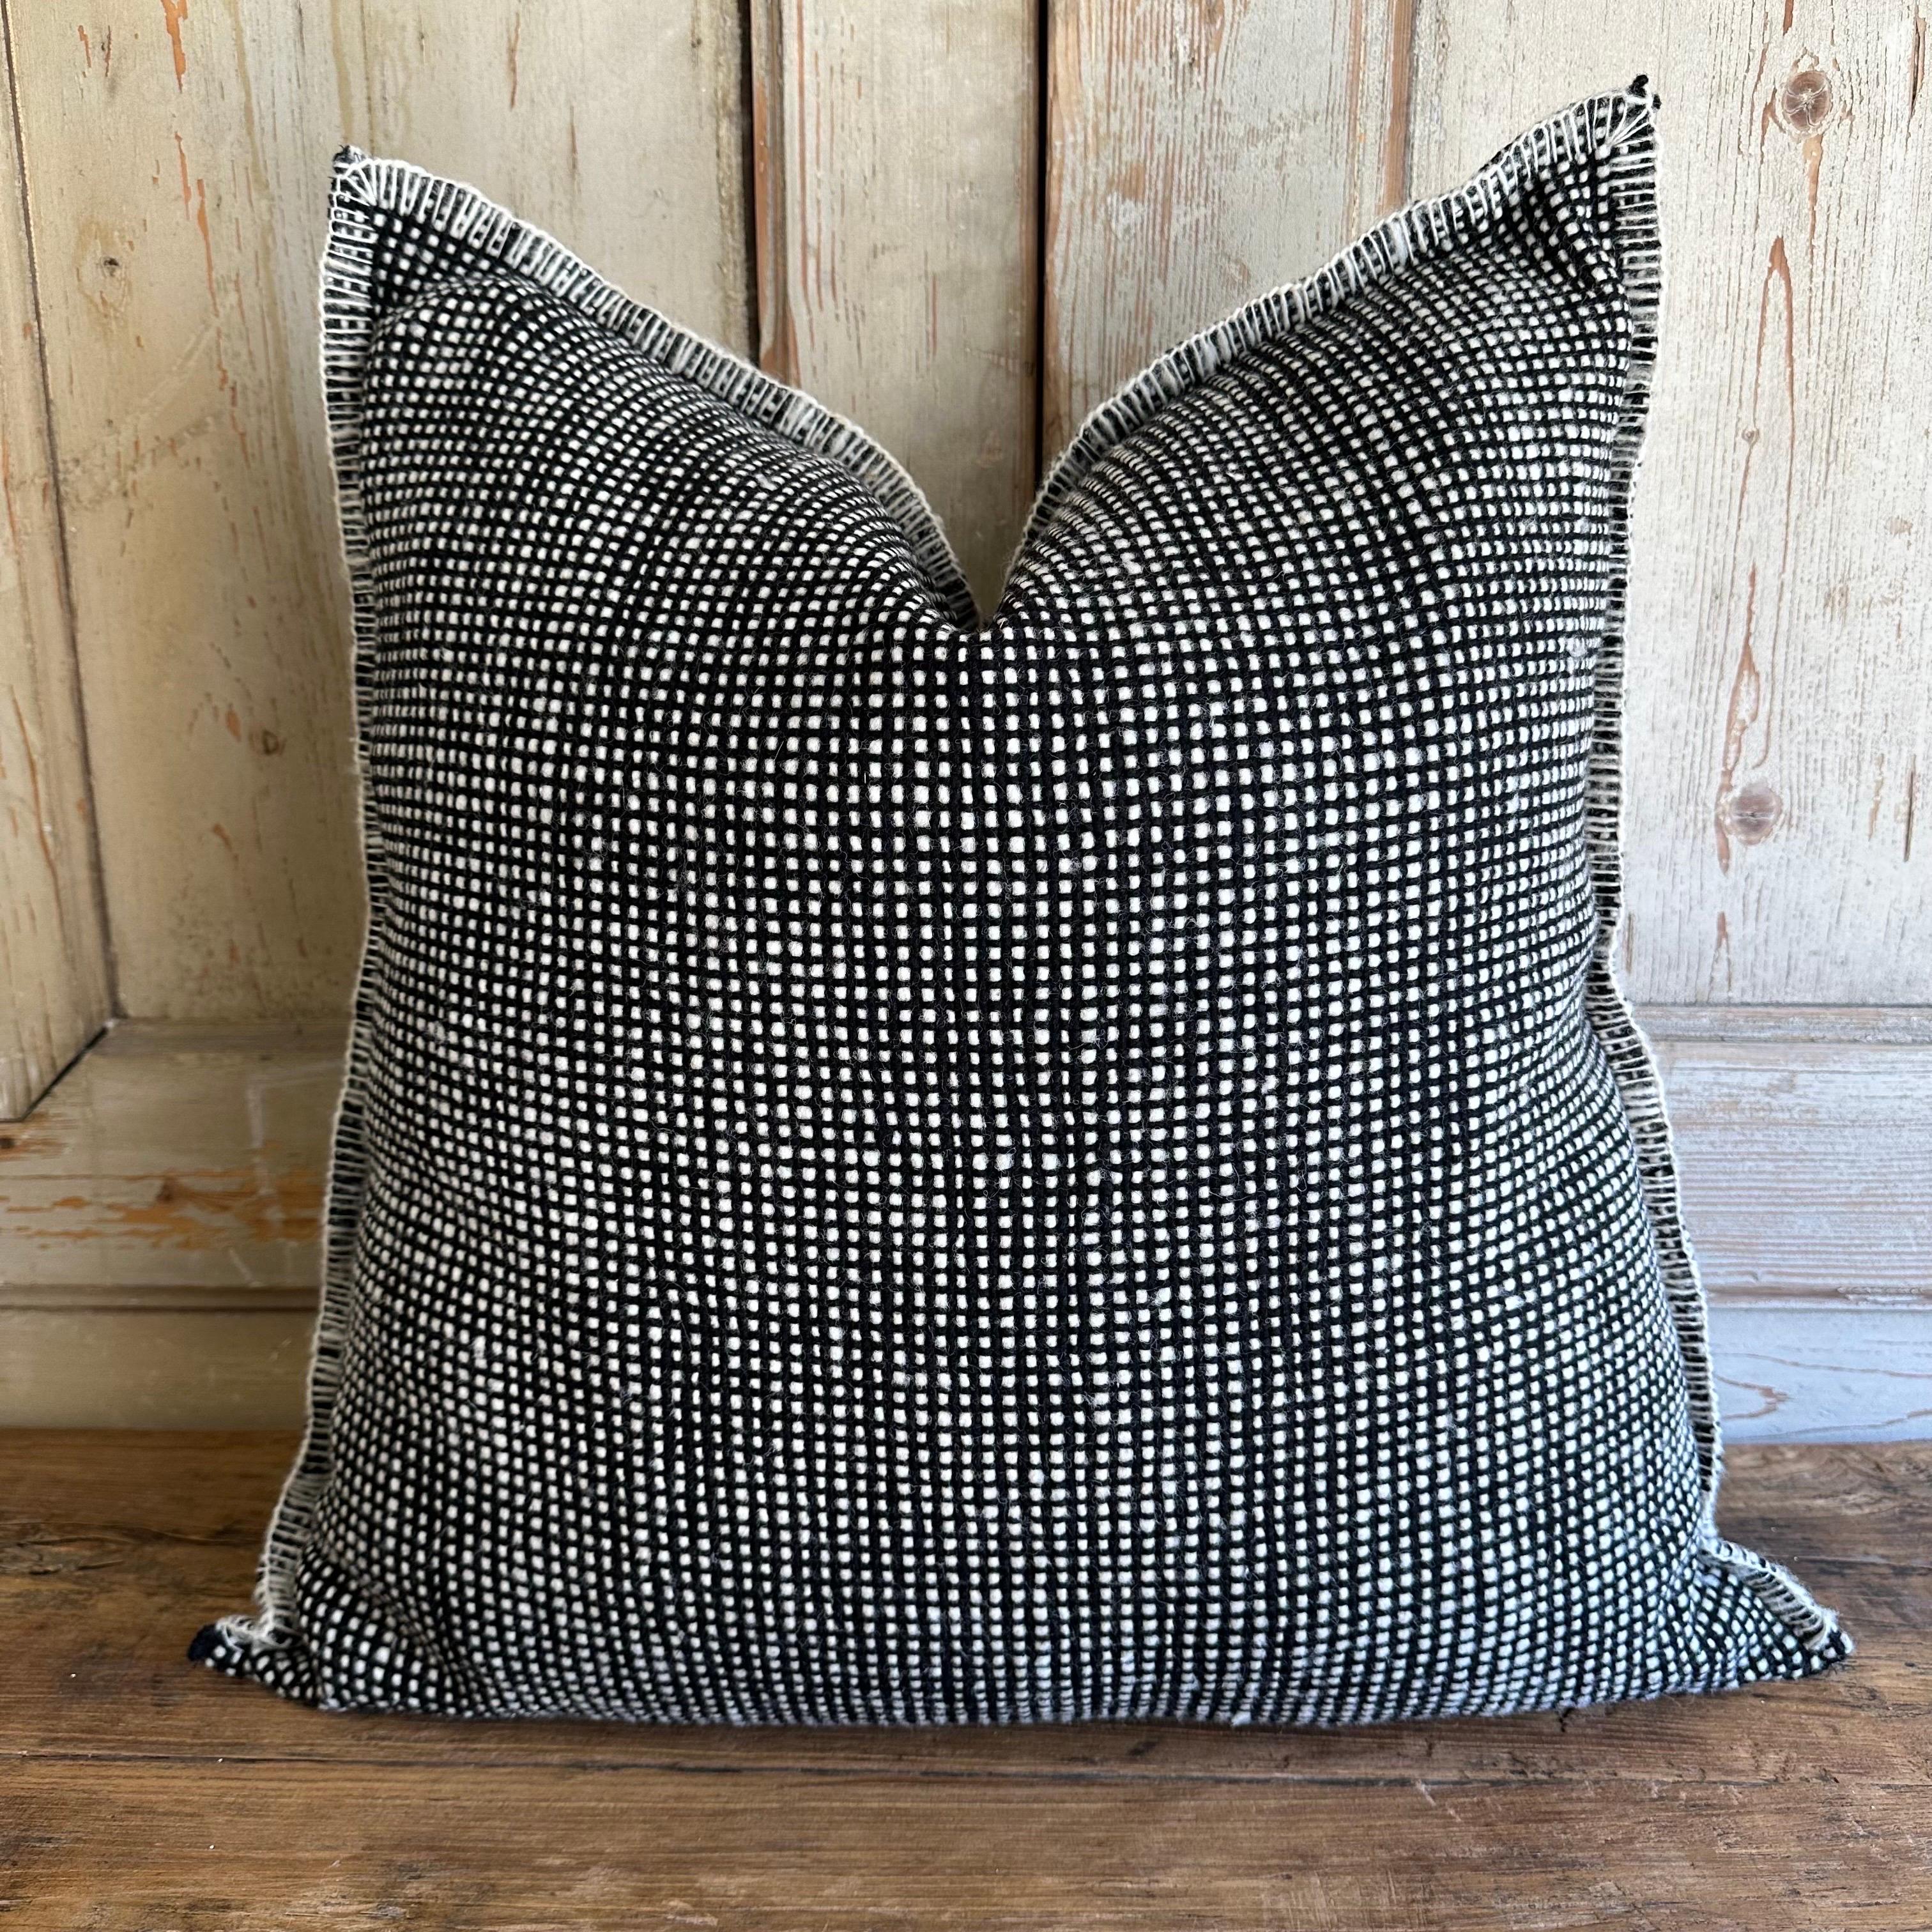 Billy hand made wool Alpaca pillow
Color: black / white
Size: 24